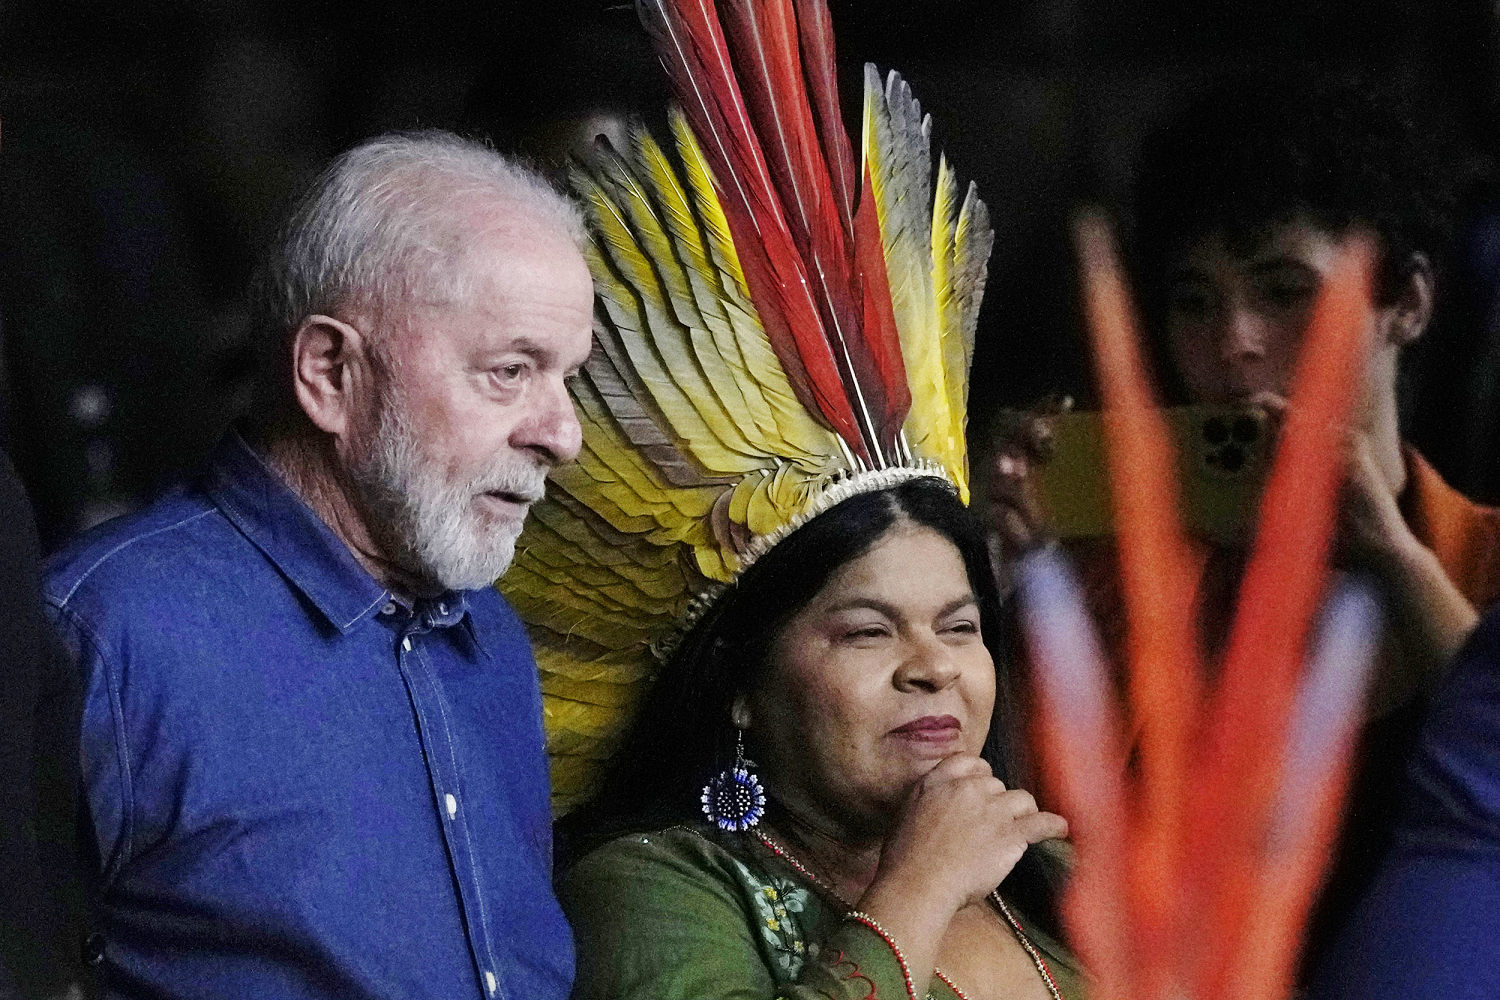 Brazil’s President Lula creates two new Indigenous territories, bringing total to 10